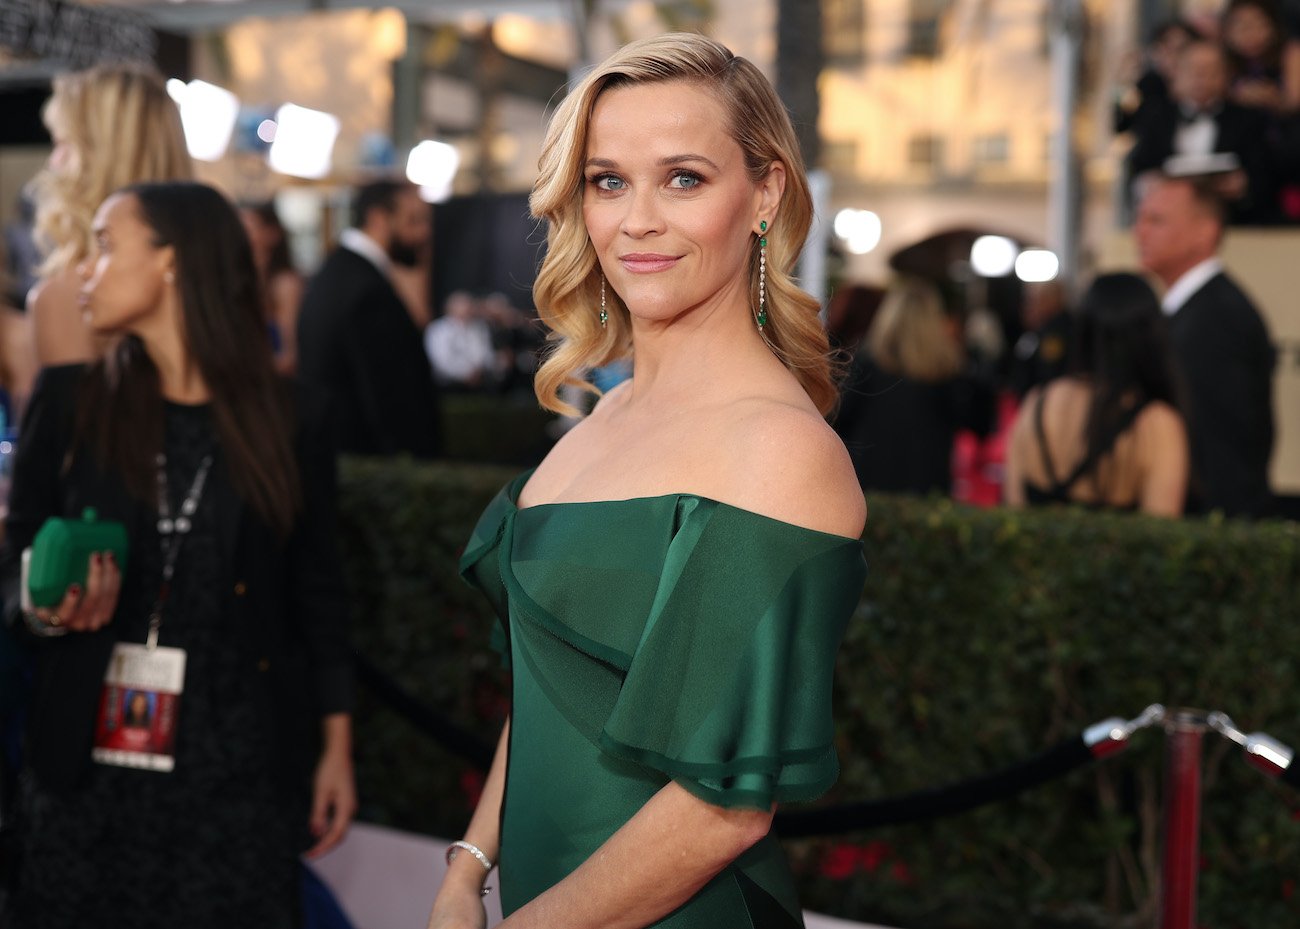 Reese Witherspoon of Big Little Lies